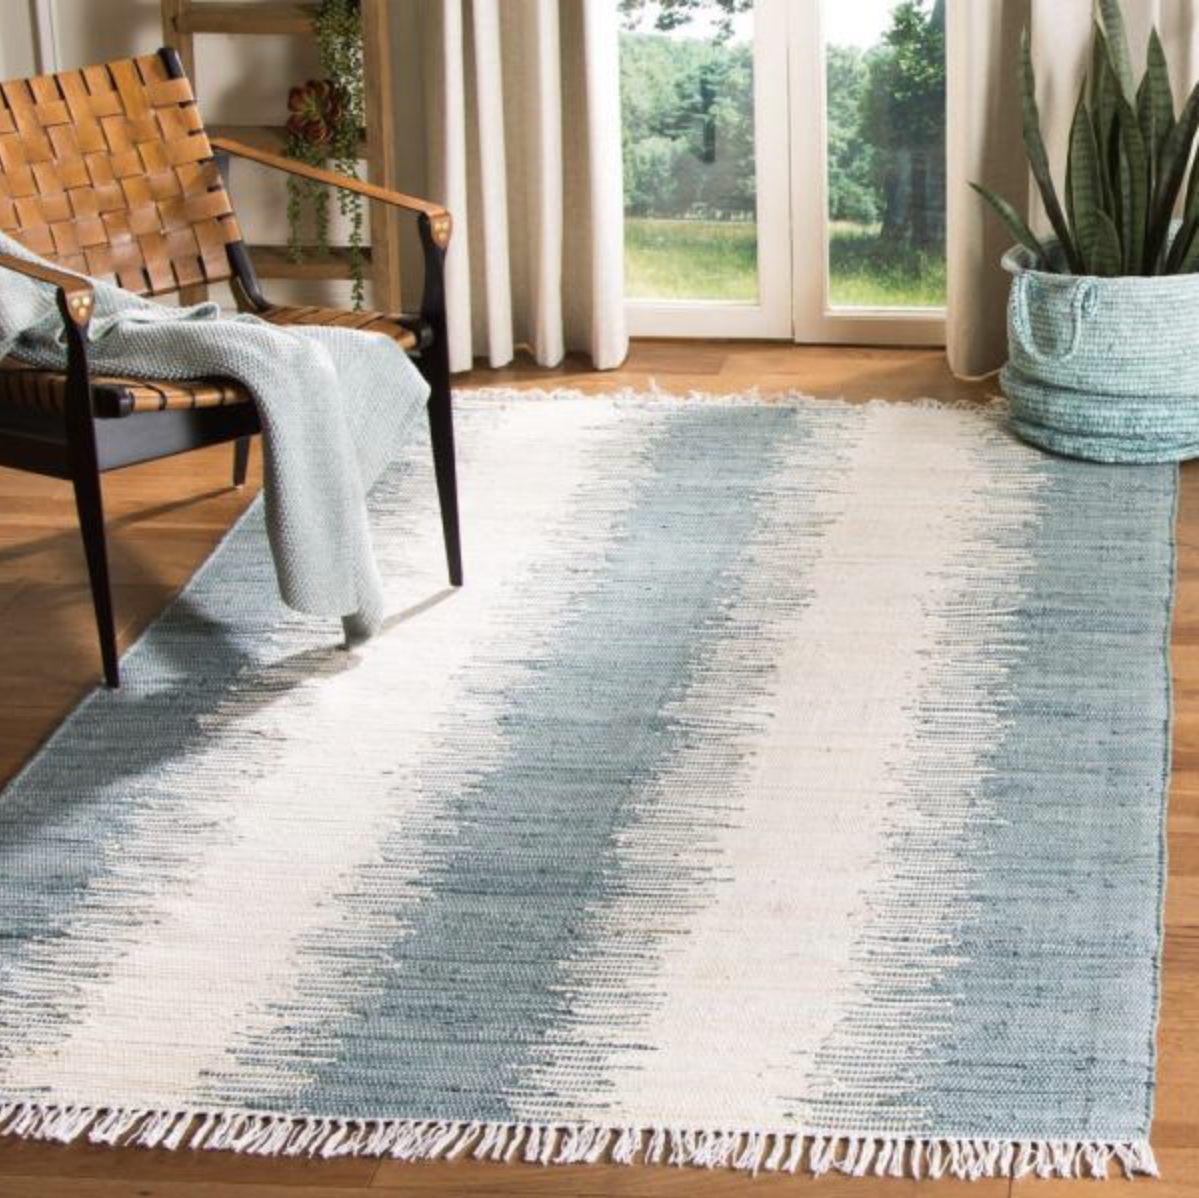 The Best Cheap Rugs 2022 - Stylish, Affordable Area Rugs